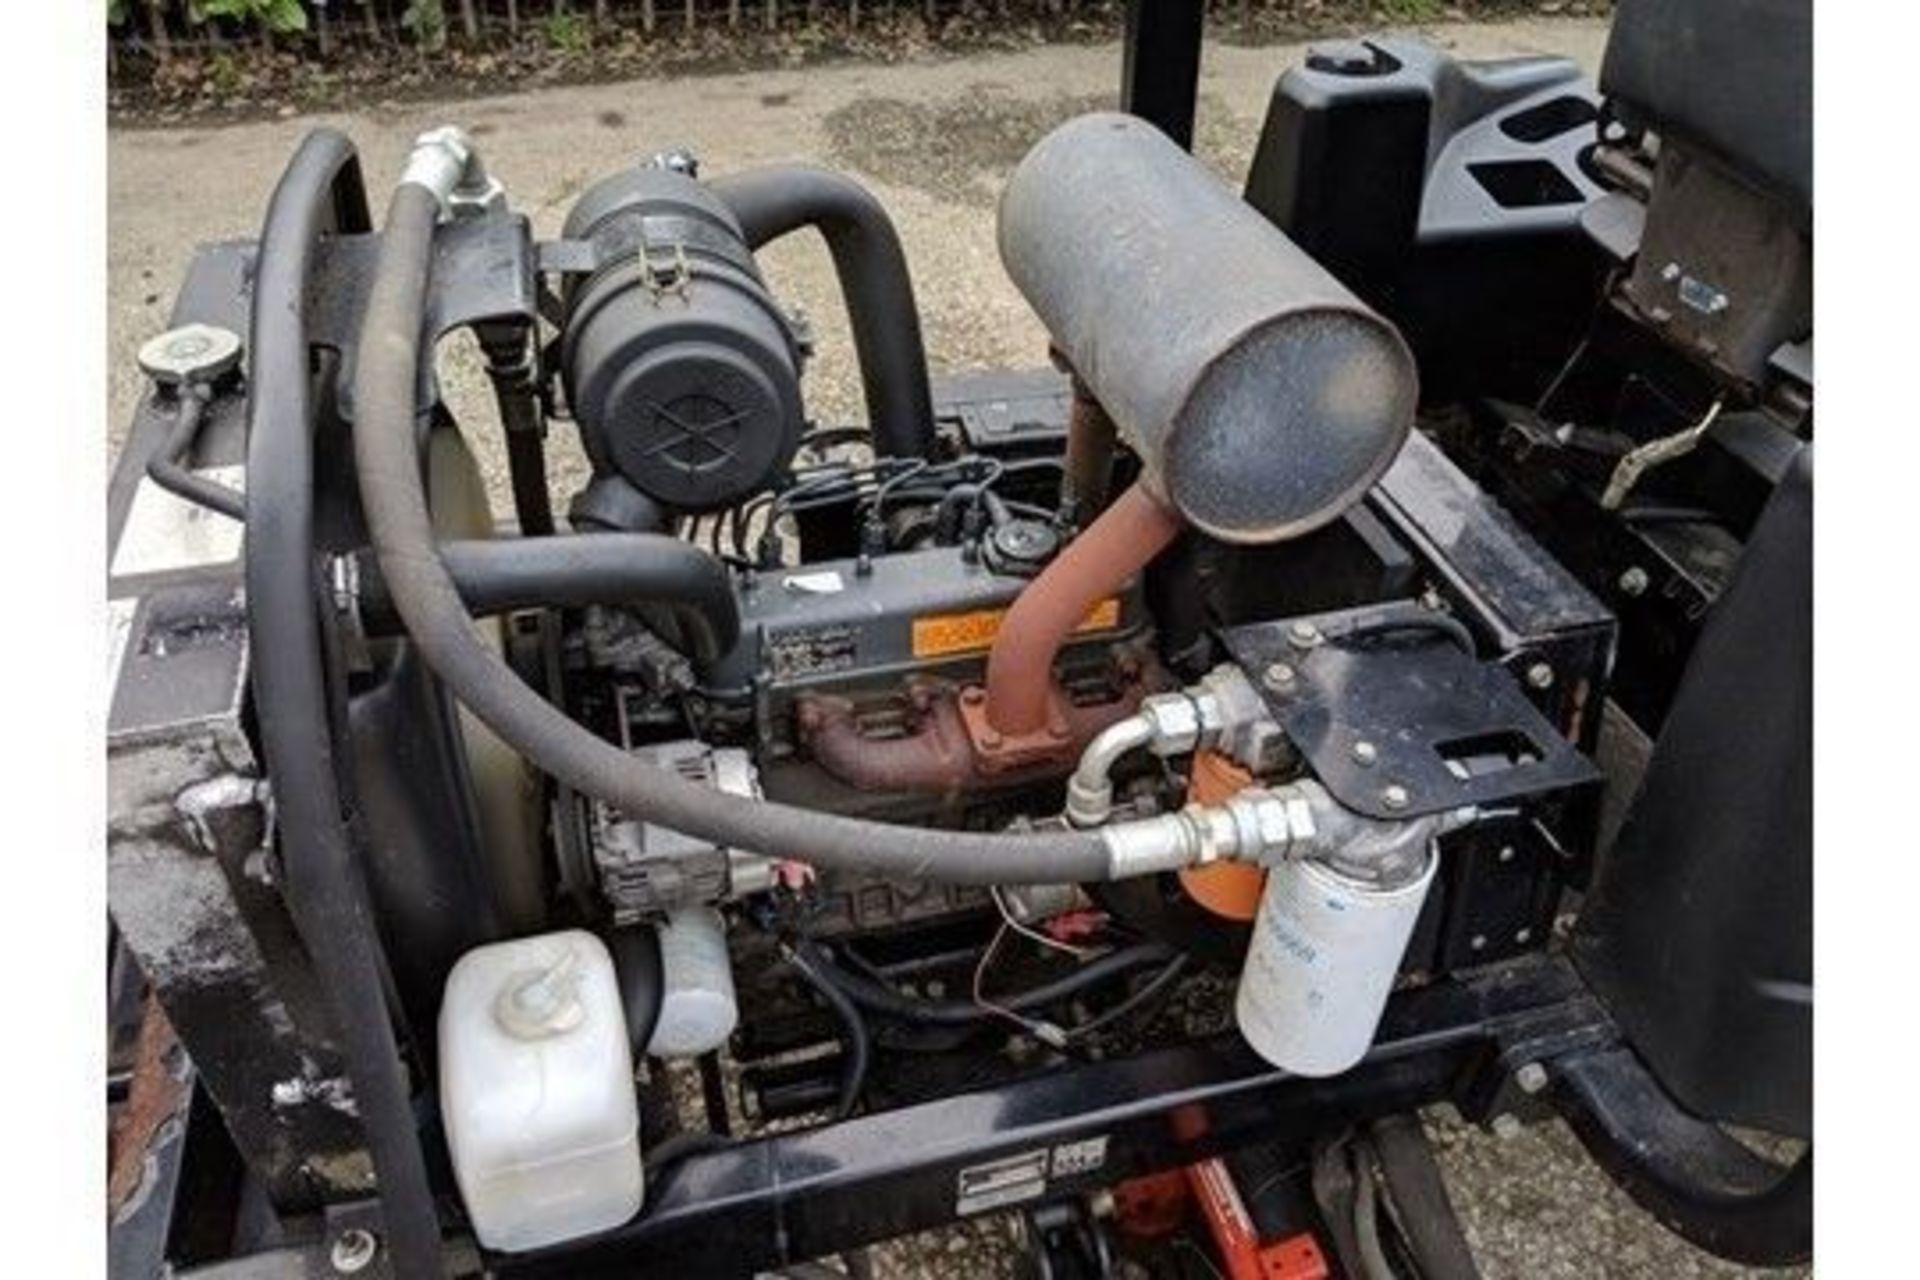 2007 Ransomes Jacobsen LF3800 4WD Cylinder Mower - Image 7 of 8